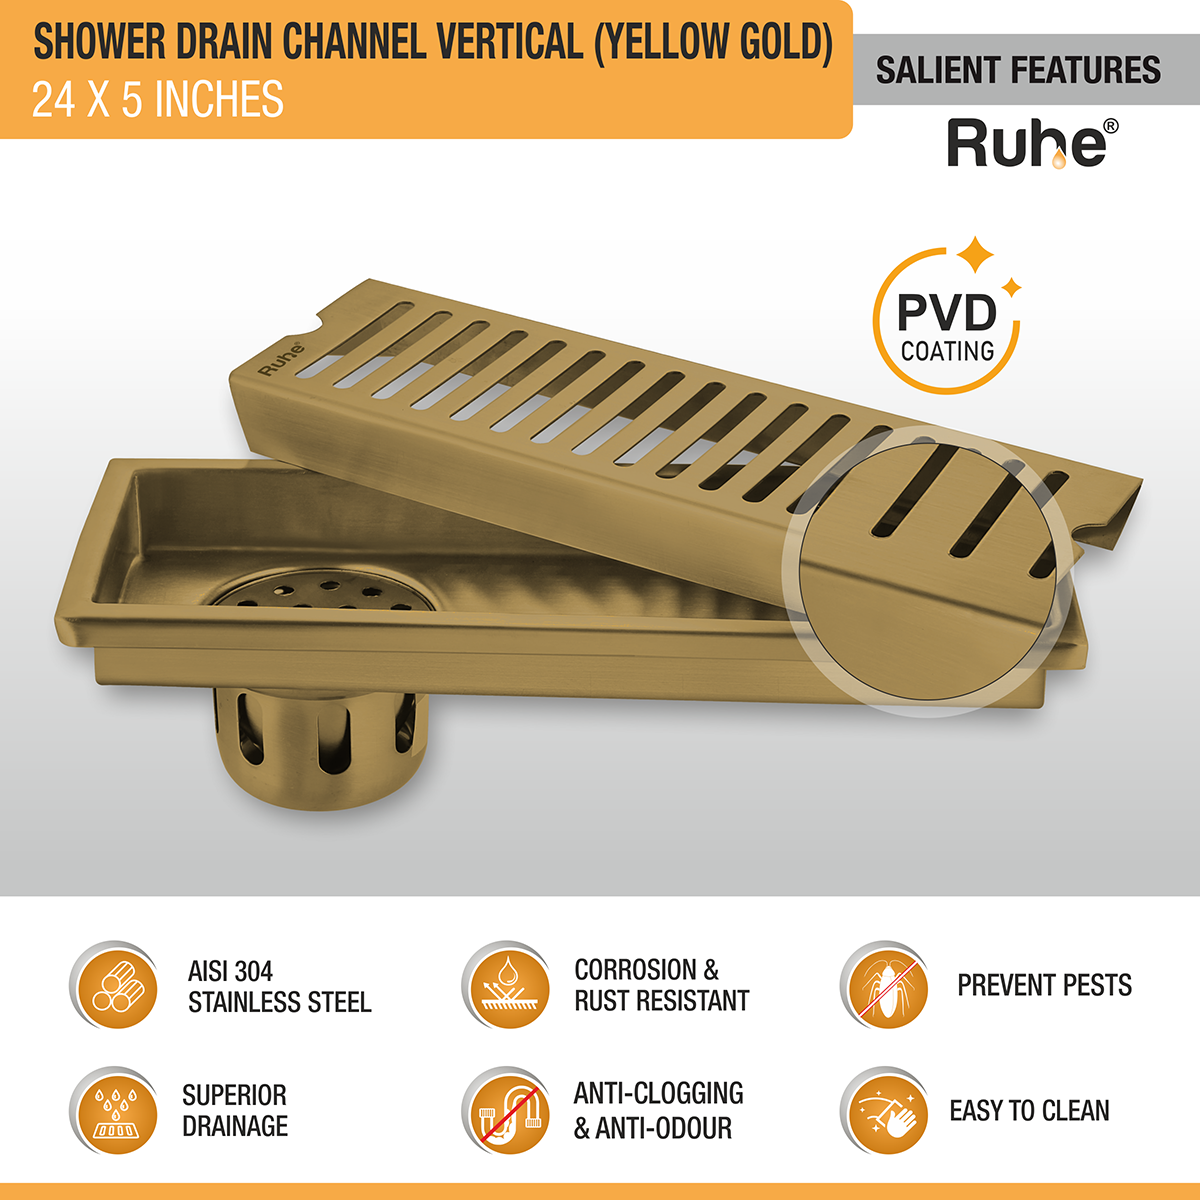 Vertical Shower Drain Channel (24 x 5 Inches) YELLOW GOLD features